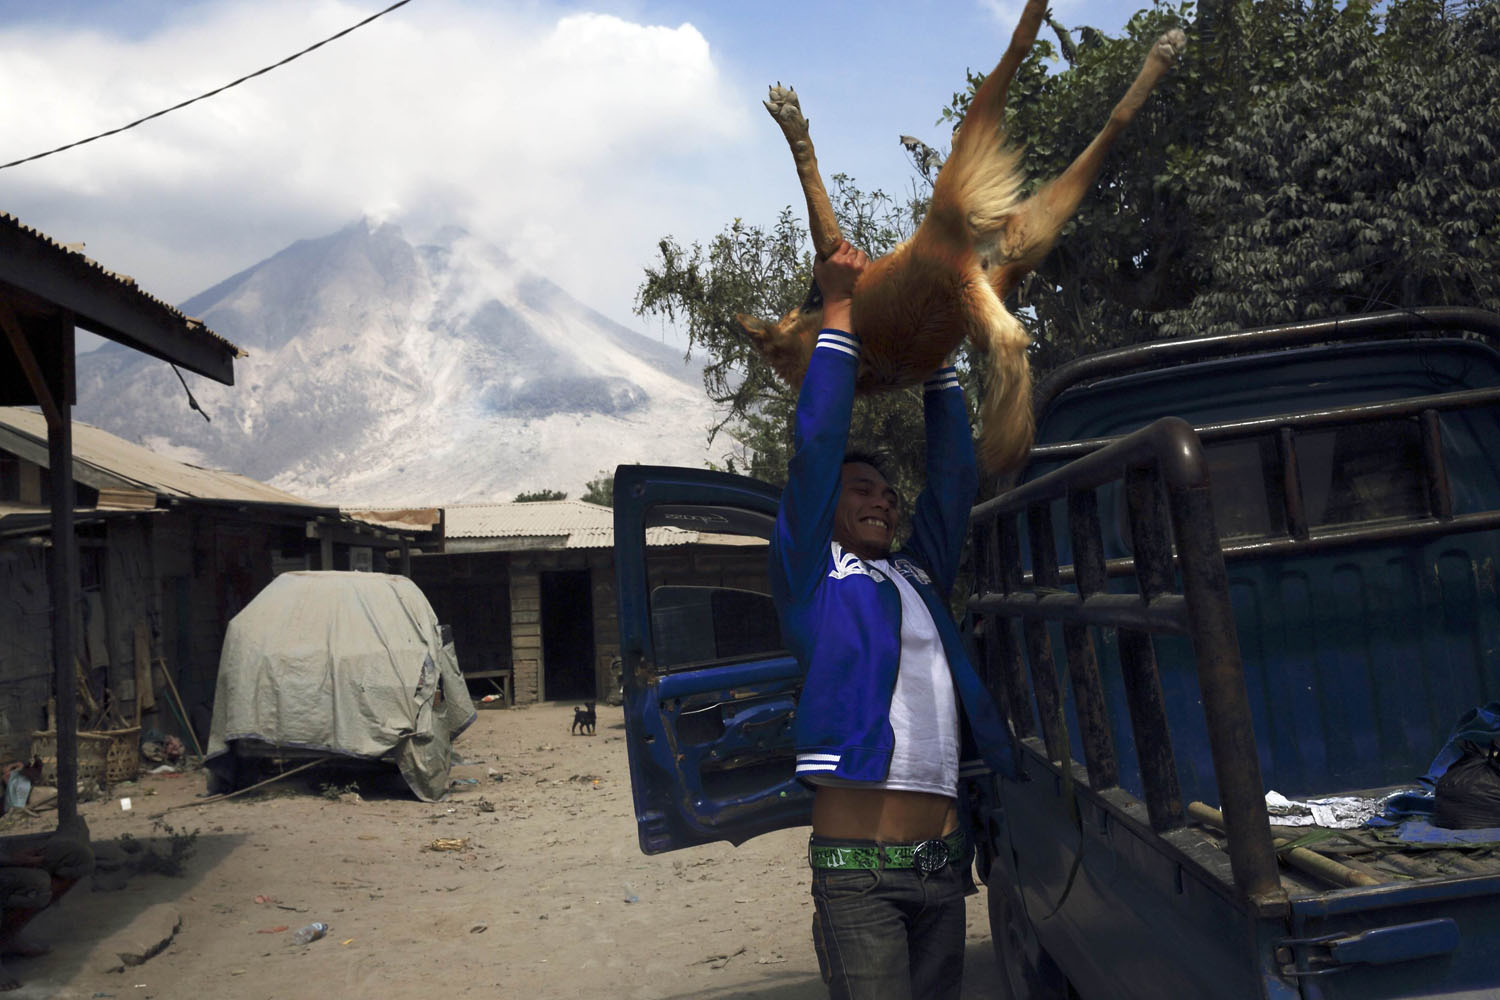 Feb. 5, 2014. A villager lifts his dog onto a truck to evacuate as Mount Sinabung spews ash at Pintu Besi village in Karo district, North Sumatra province, Indonesia.